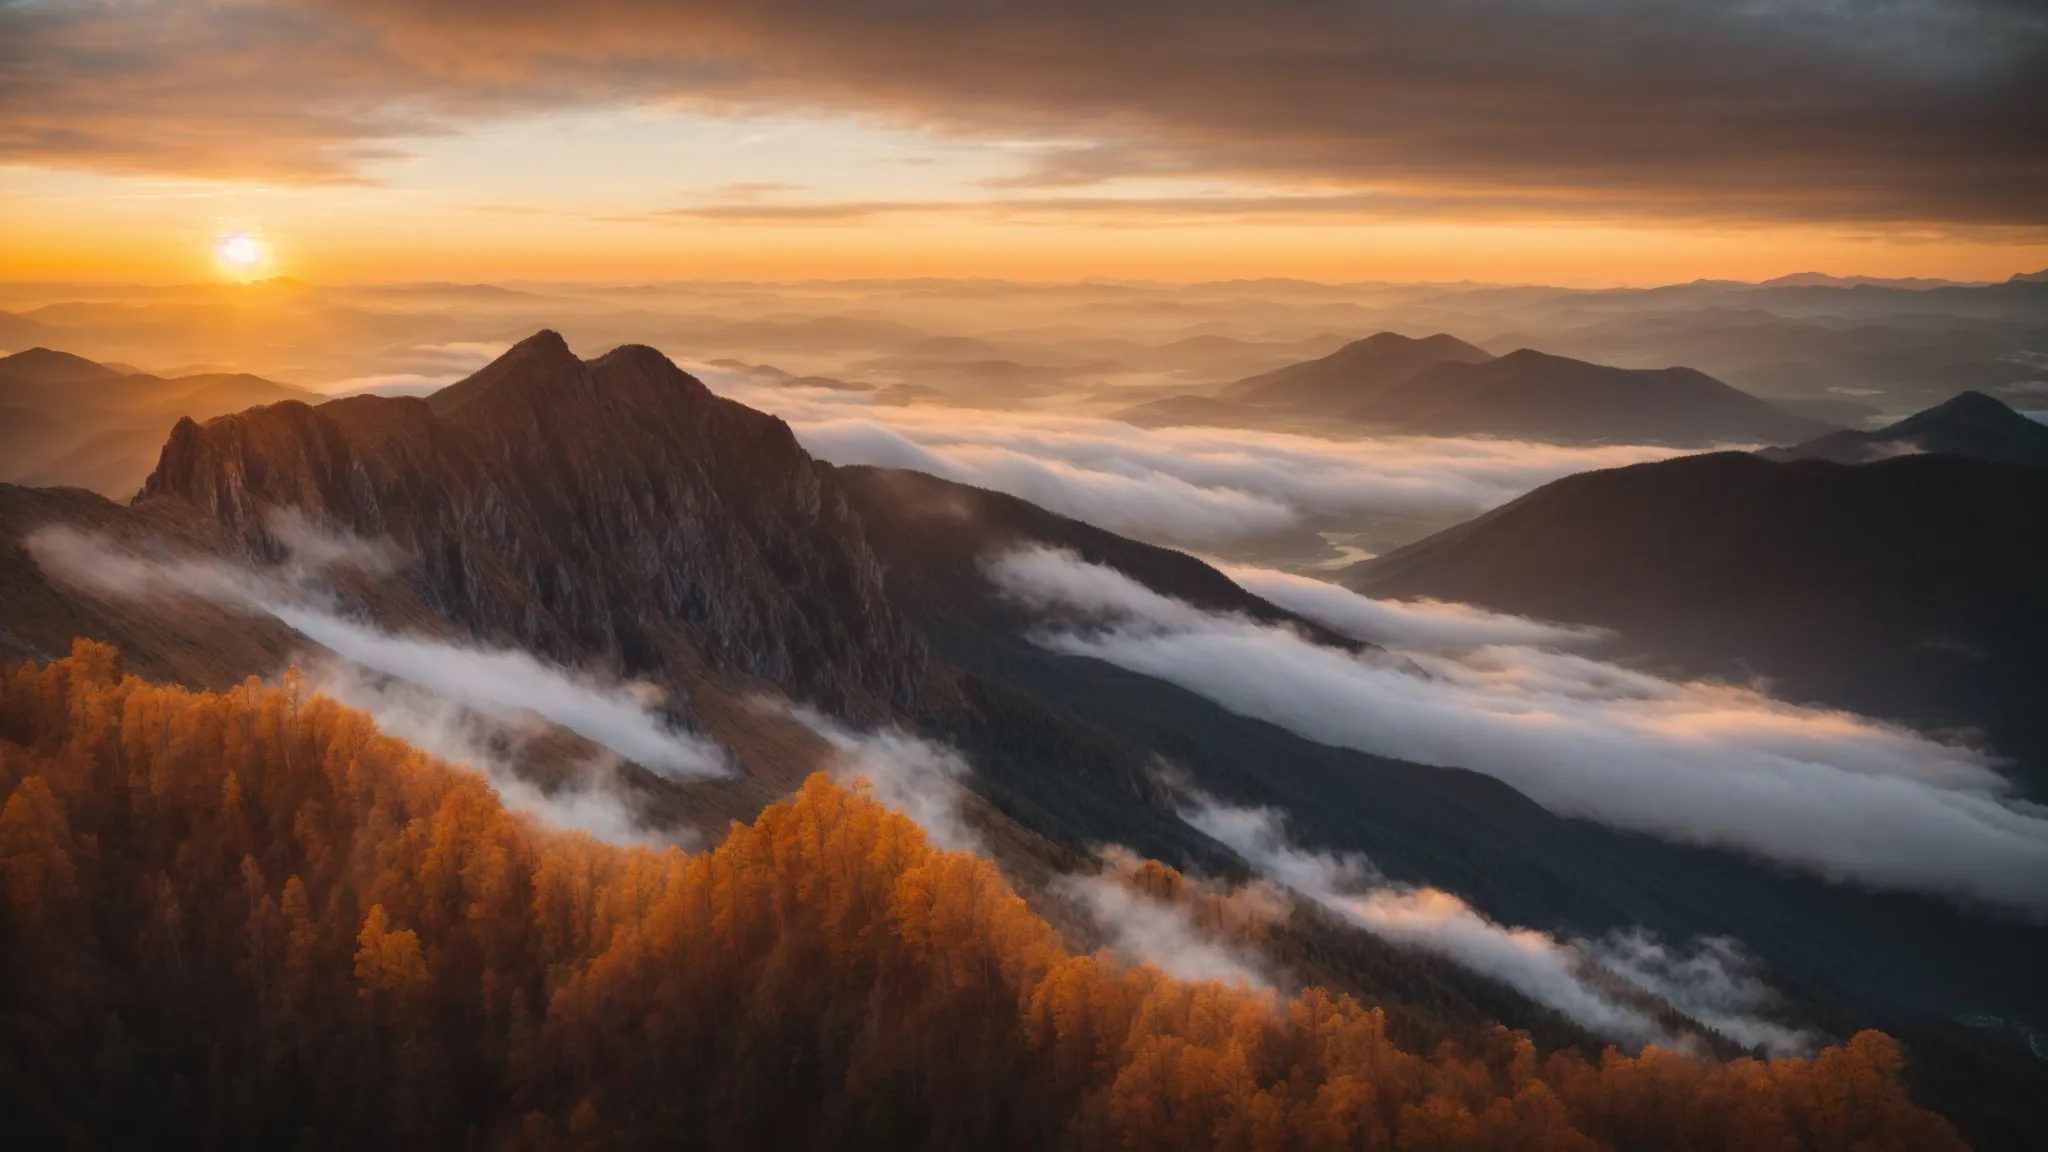 a sunset view from a mountain top, casting a golden hue over the clouds below.